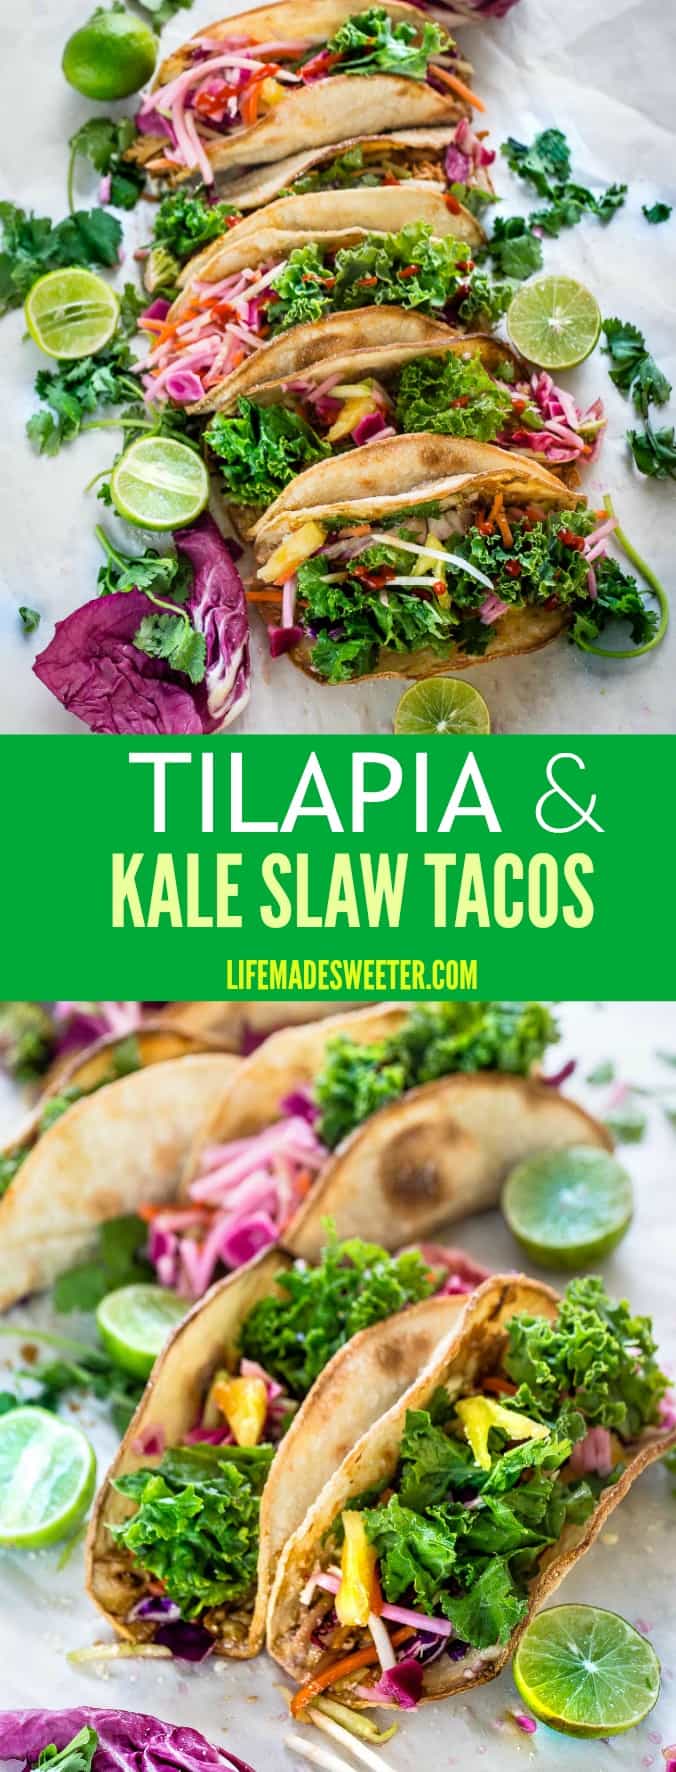 Tilapia & Kale Slaw Tacos make the perfect easy & healthy meal